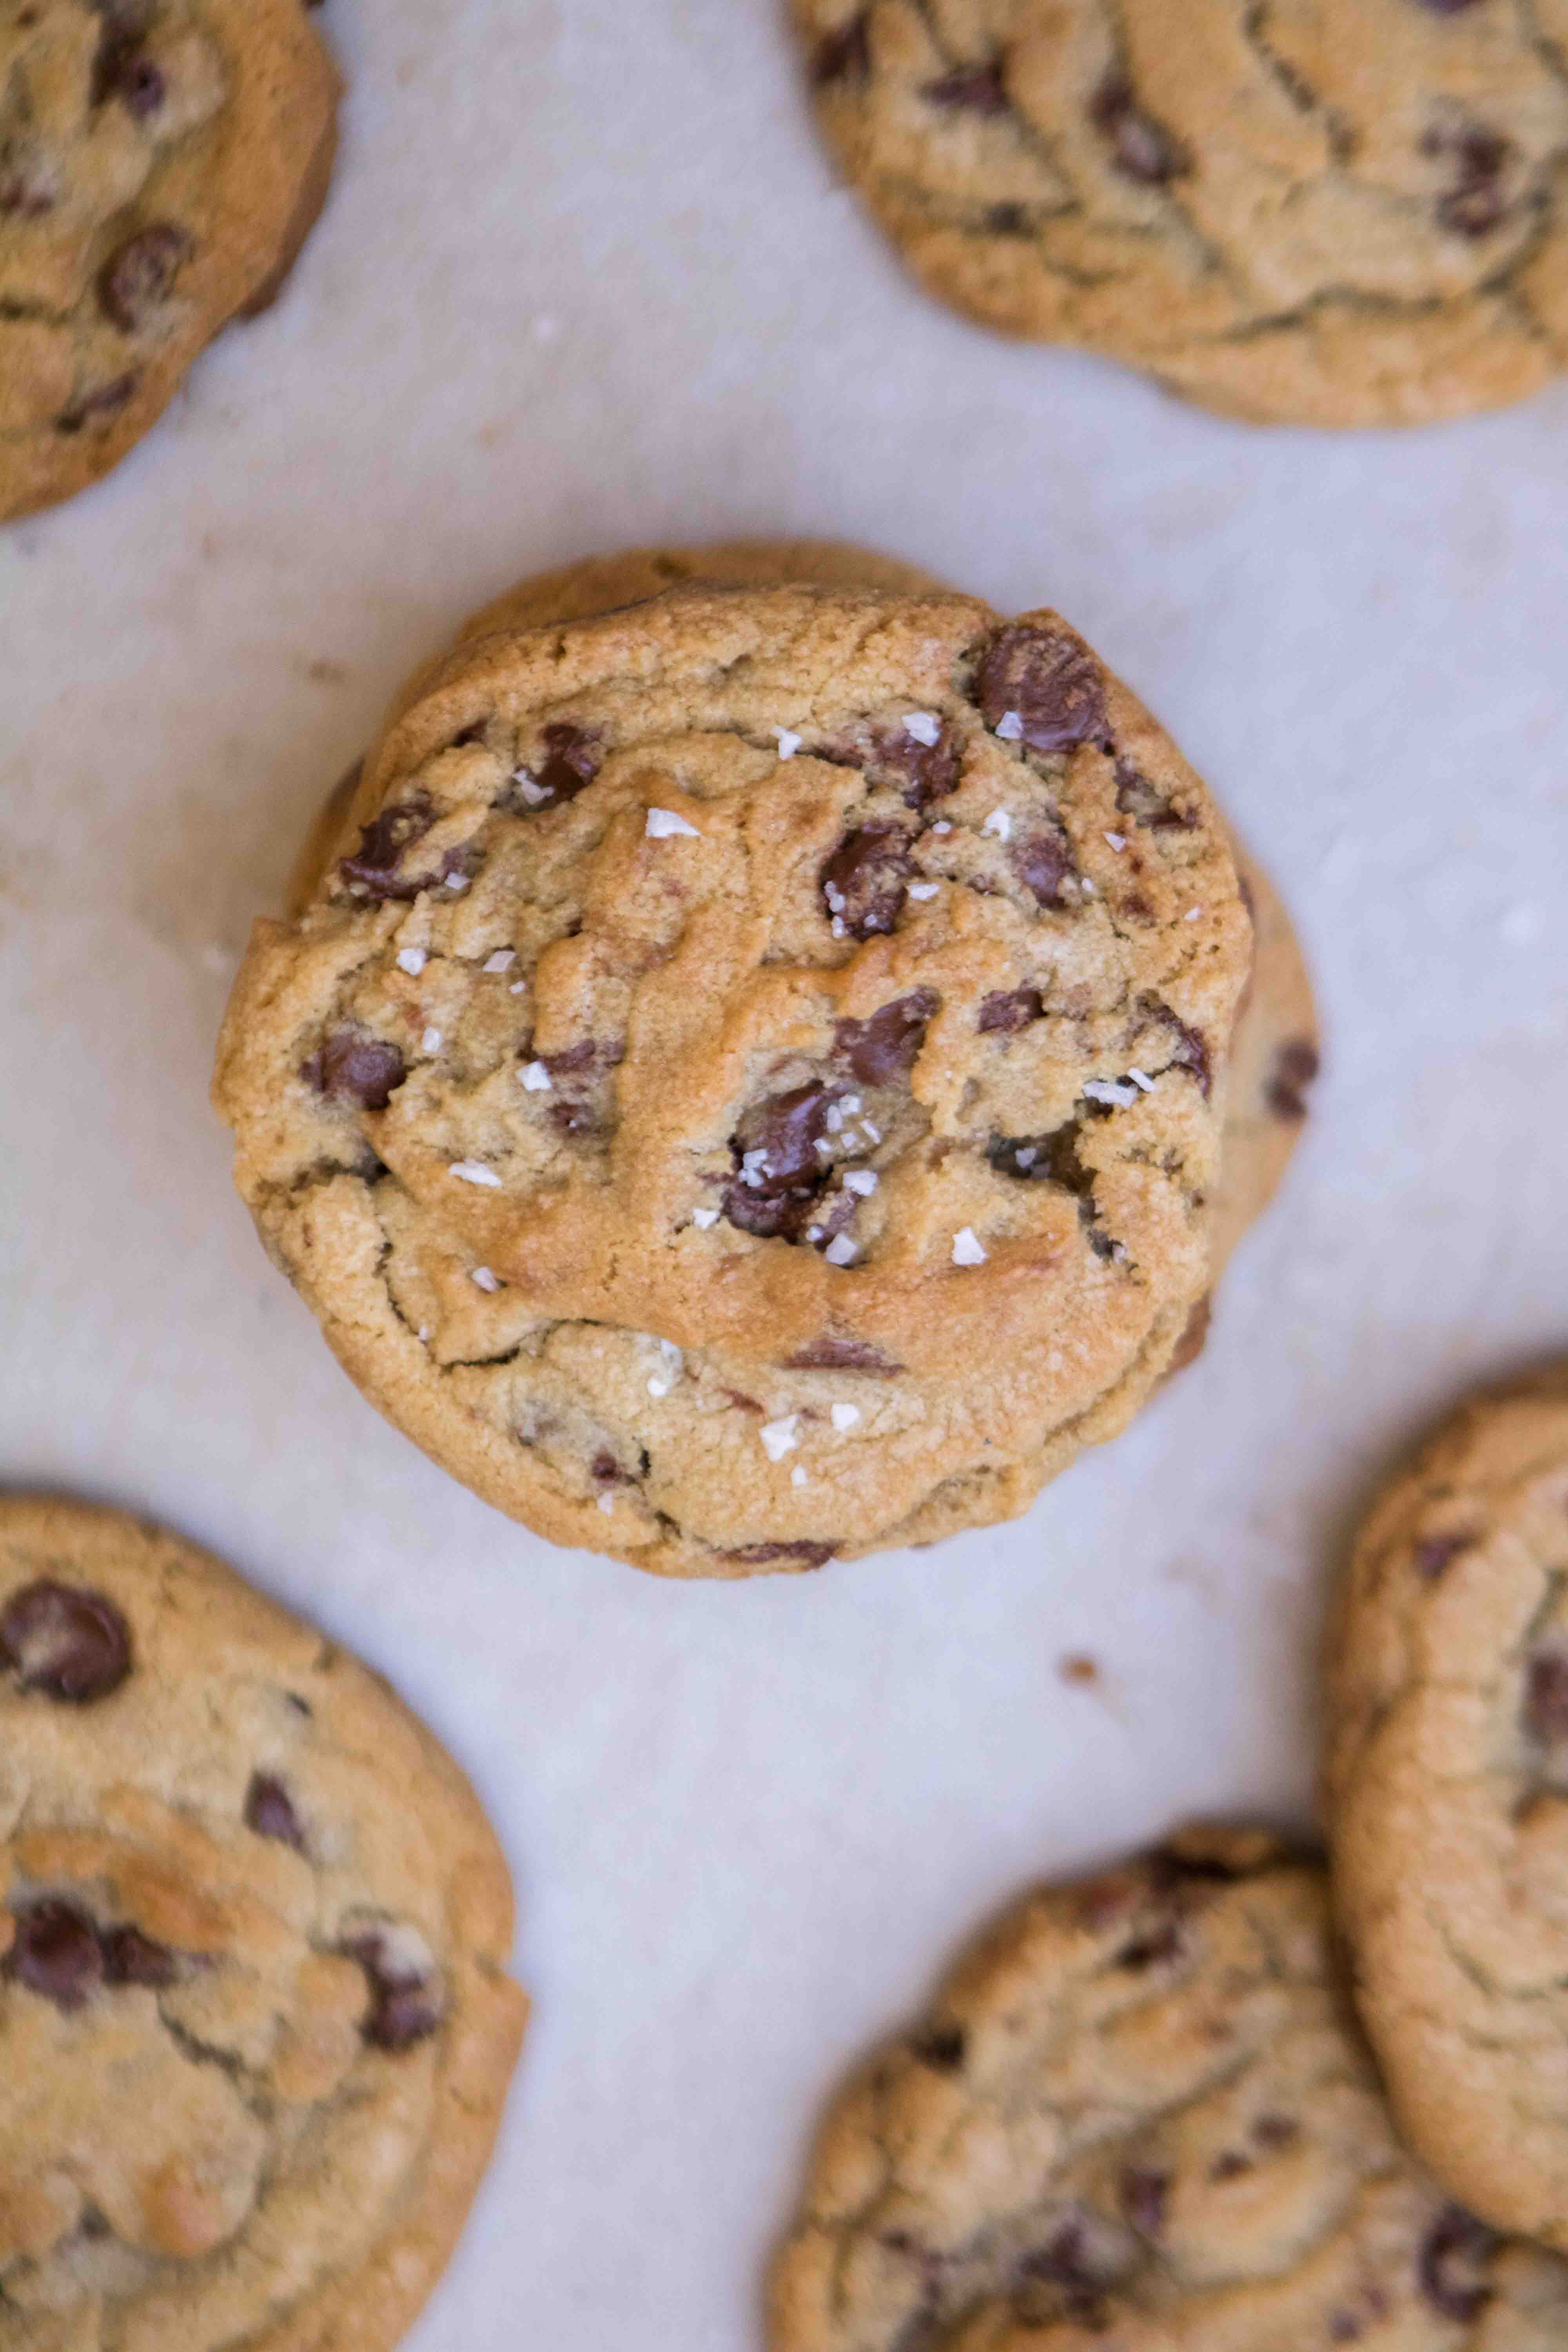 Brown butter chocolate chips that taste like toffee topped with sea salt